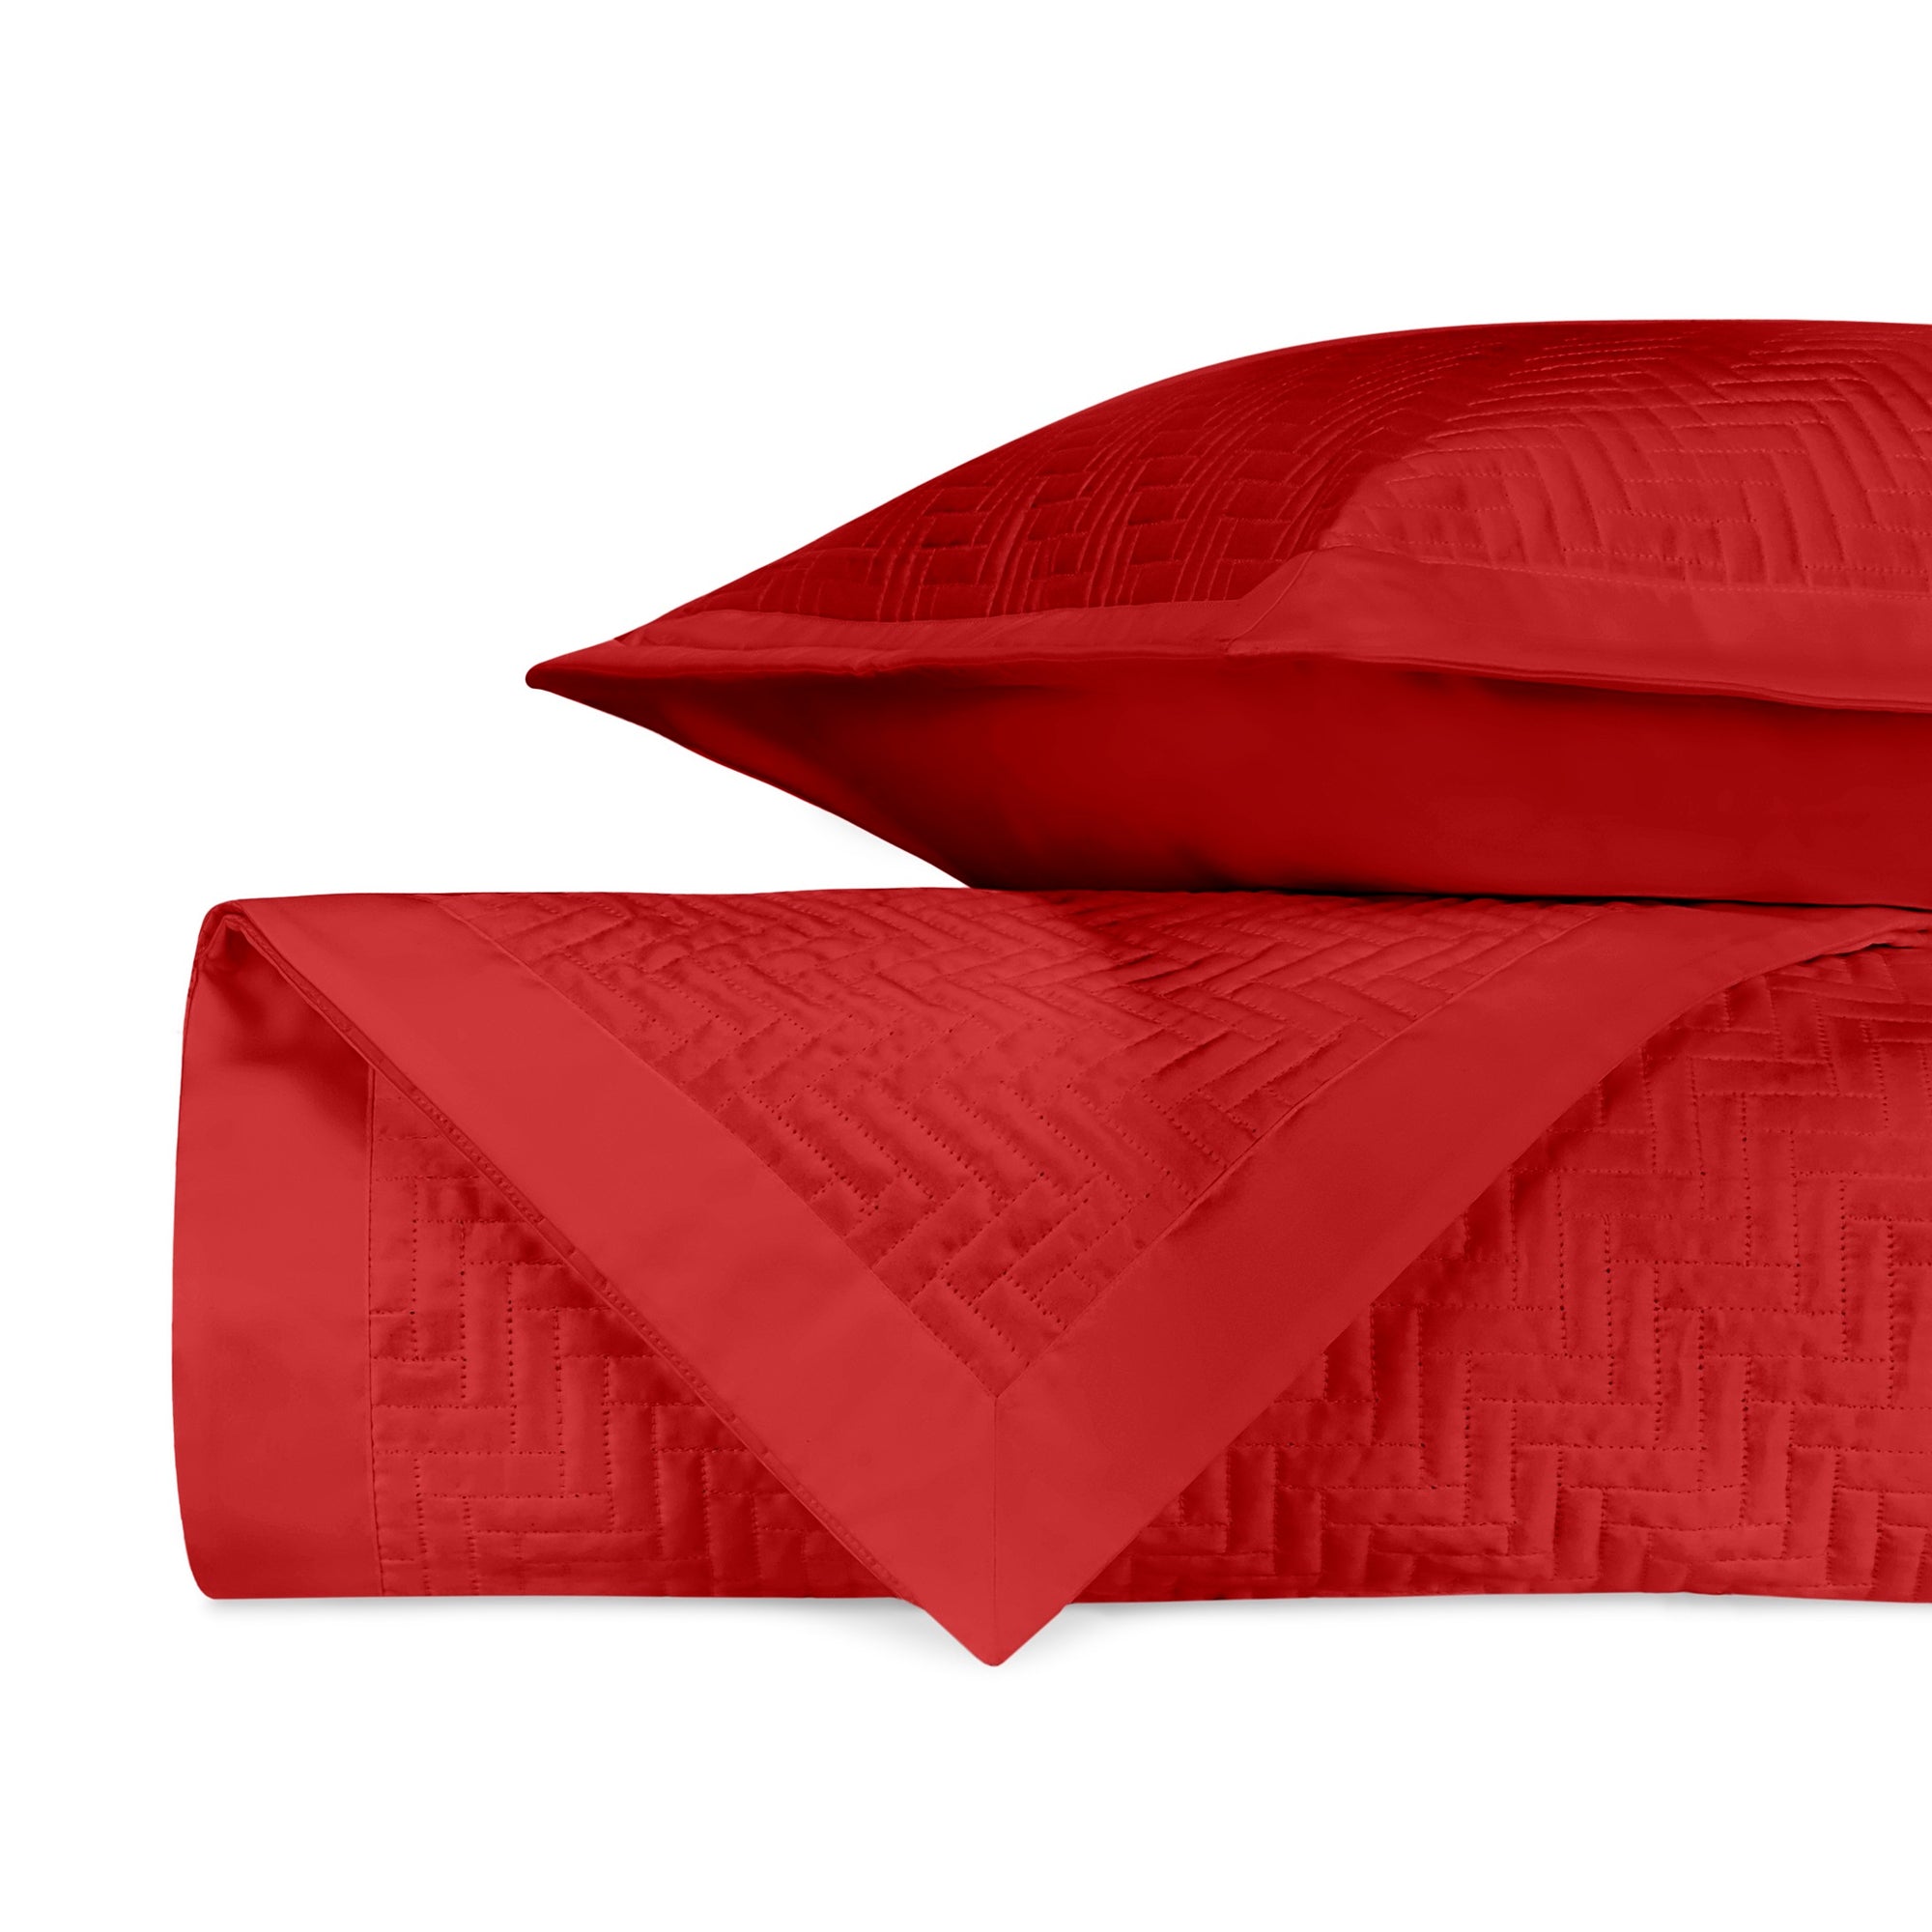 Stack Image of Home Treasures Baxter Royal Sateen Quilted Bedding in Color Bright Red